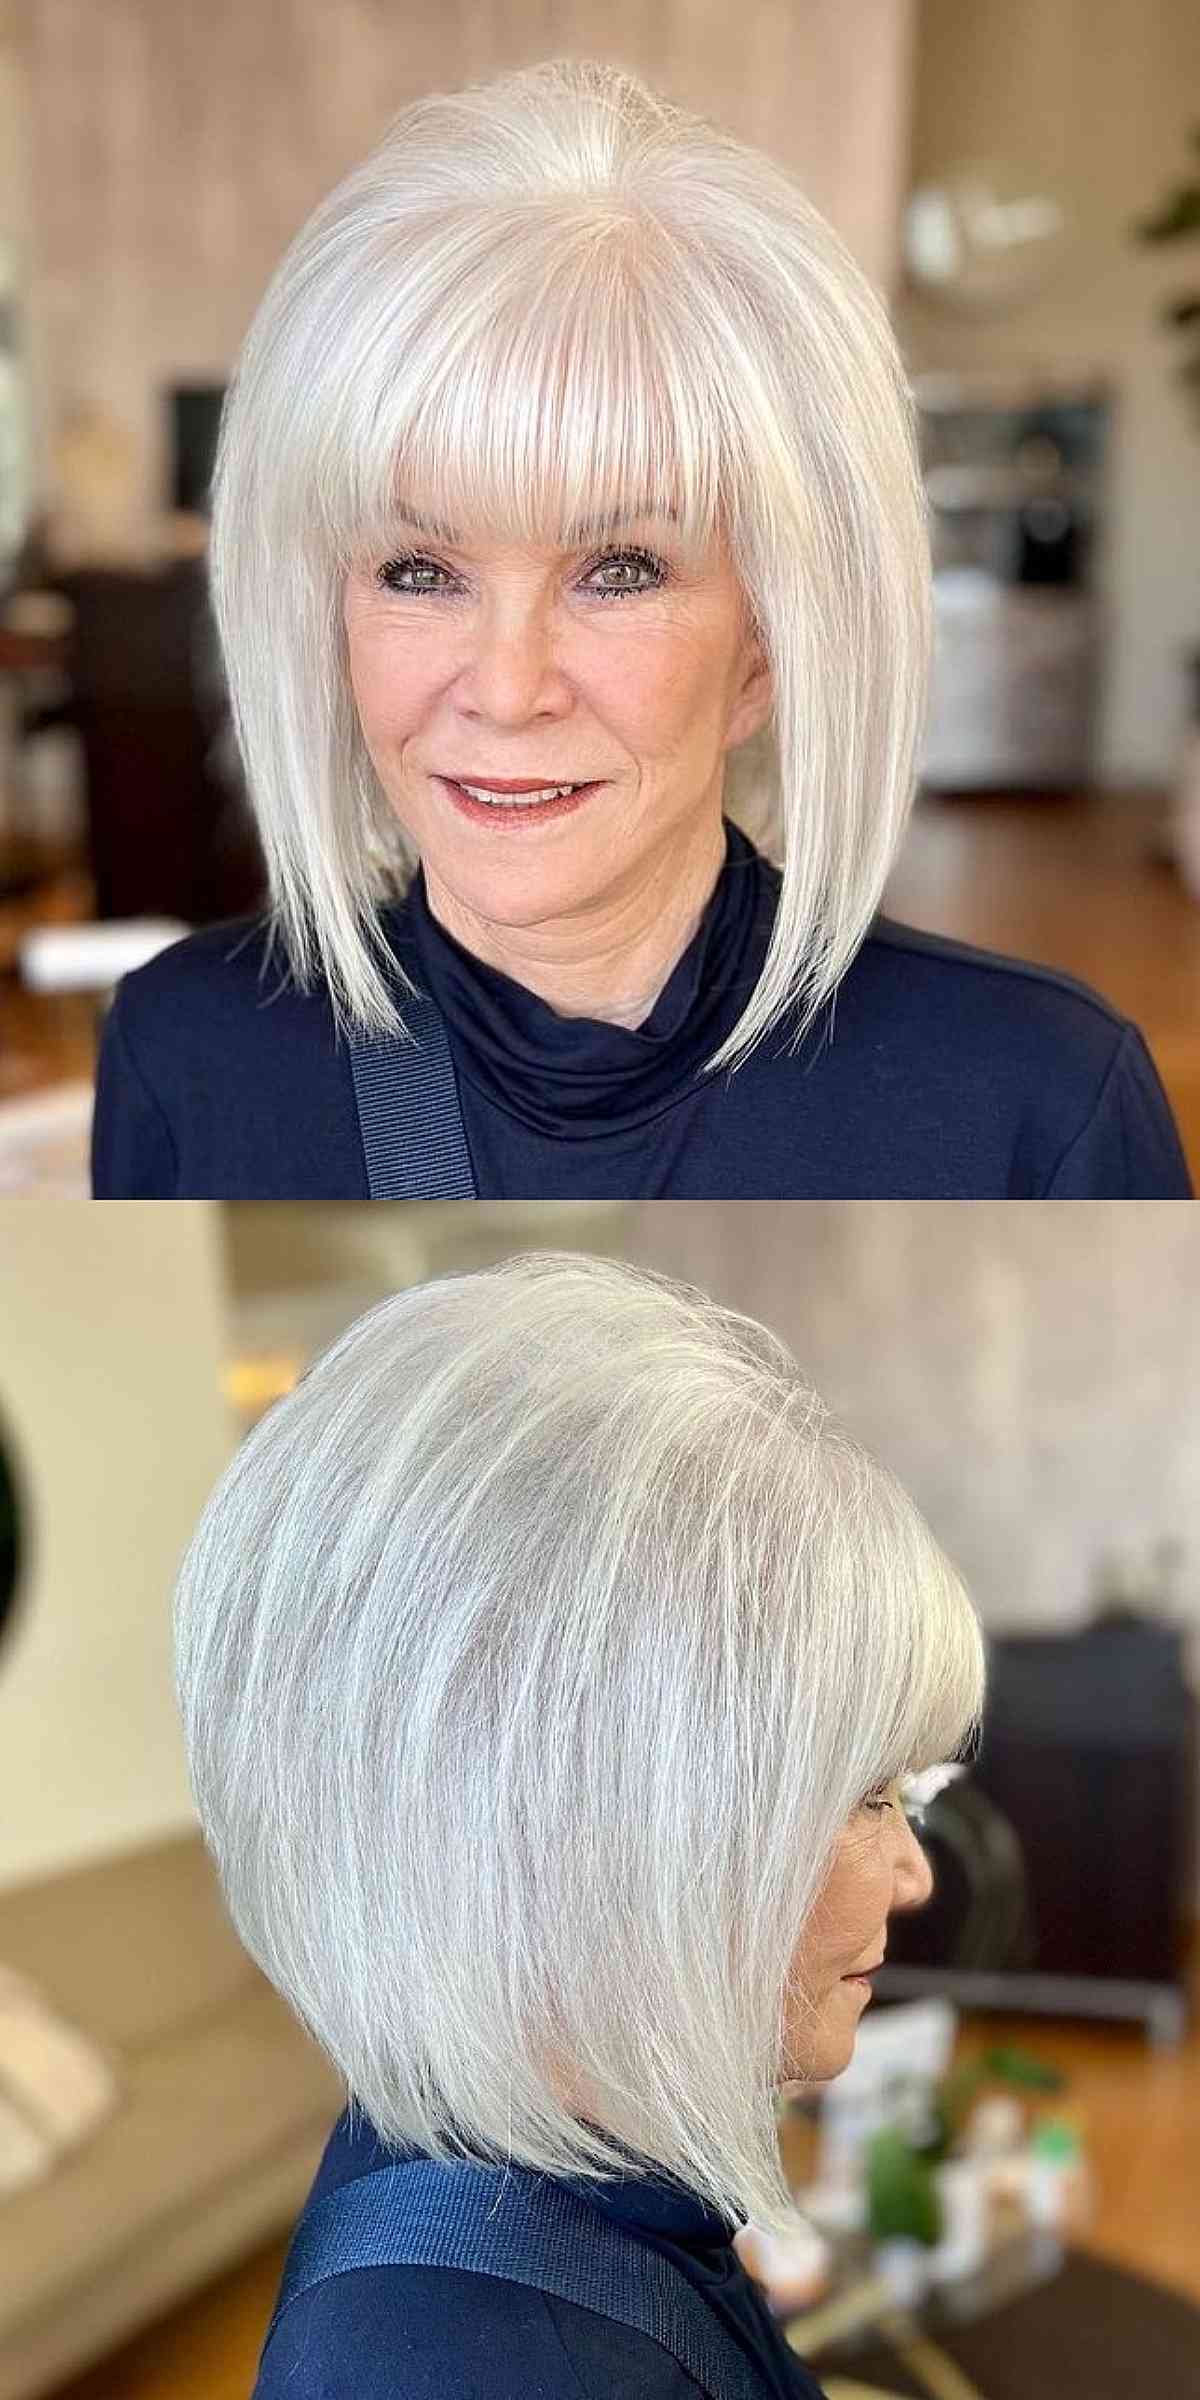 The Wispy Casual Long Bob for Ladies Over Fifty